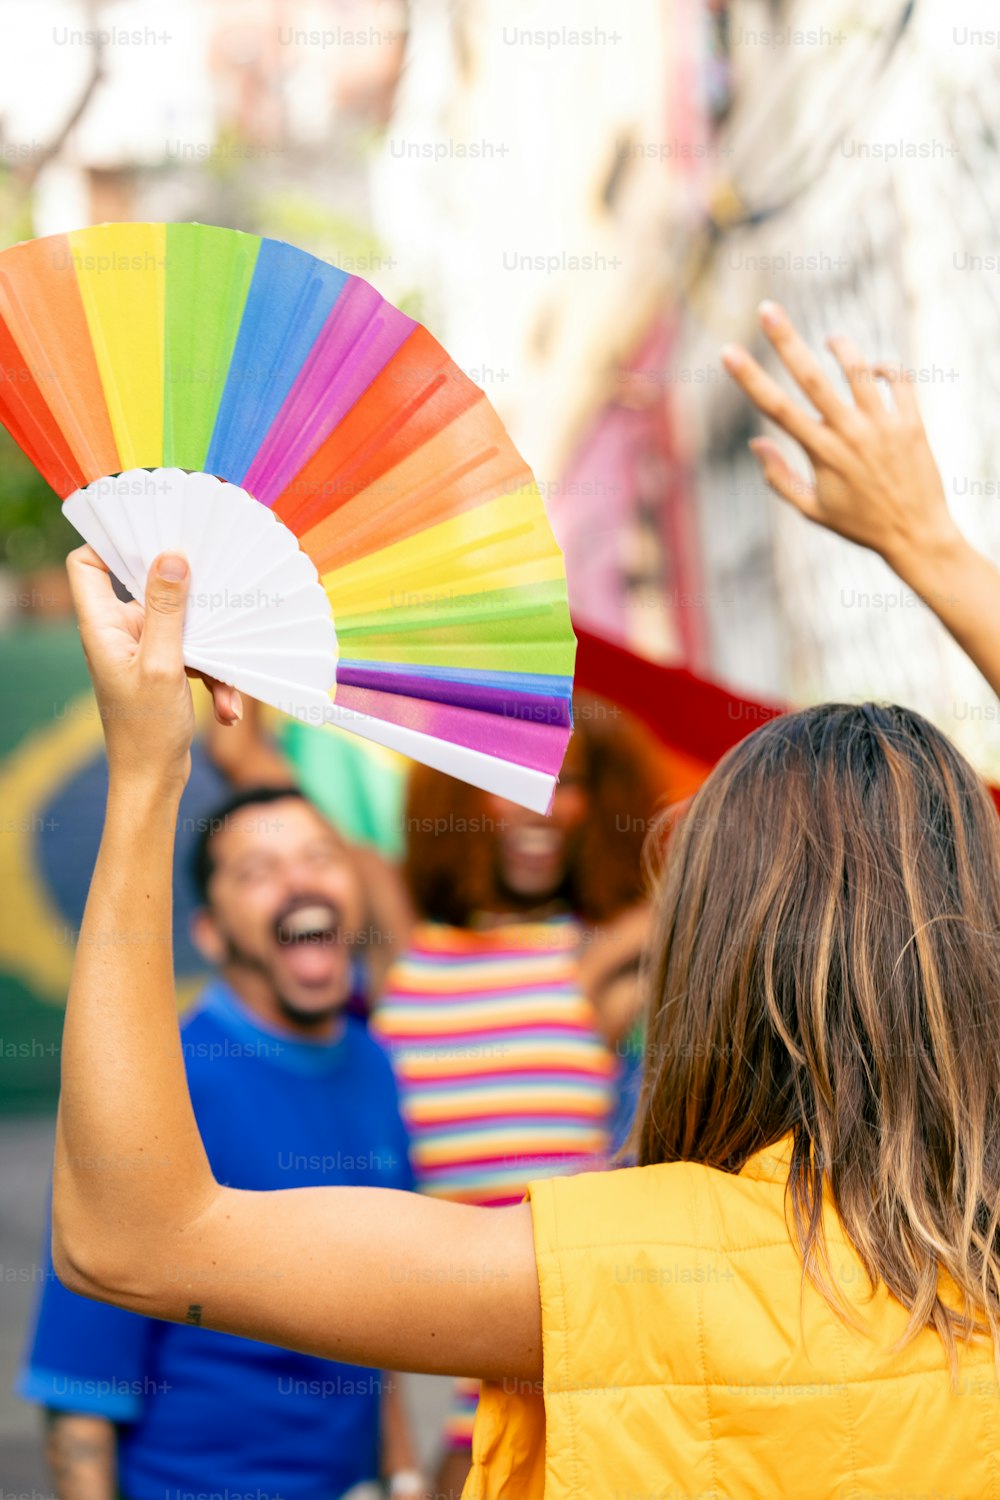 a woman holding a colorful fan in front of a group of people